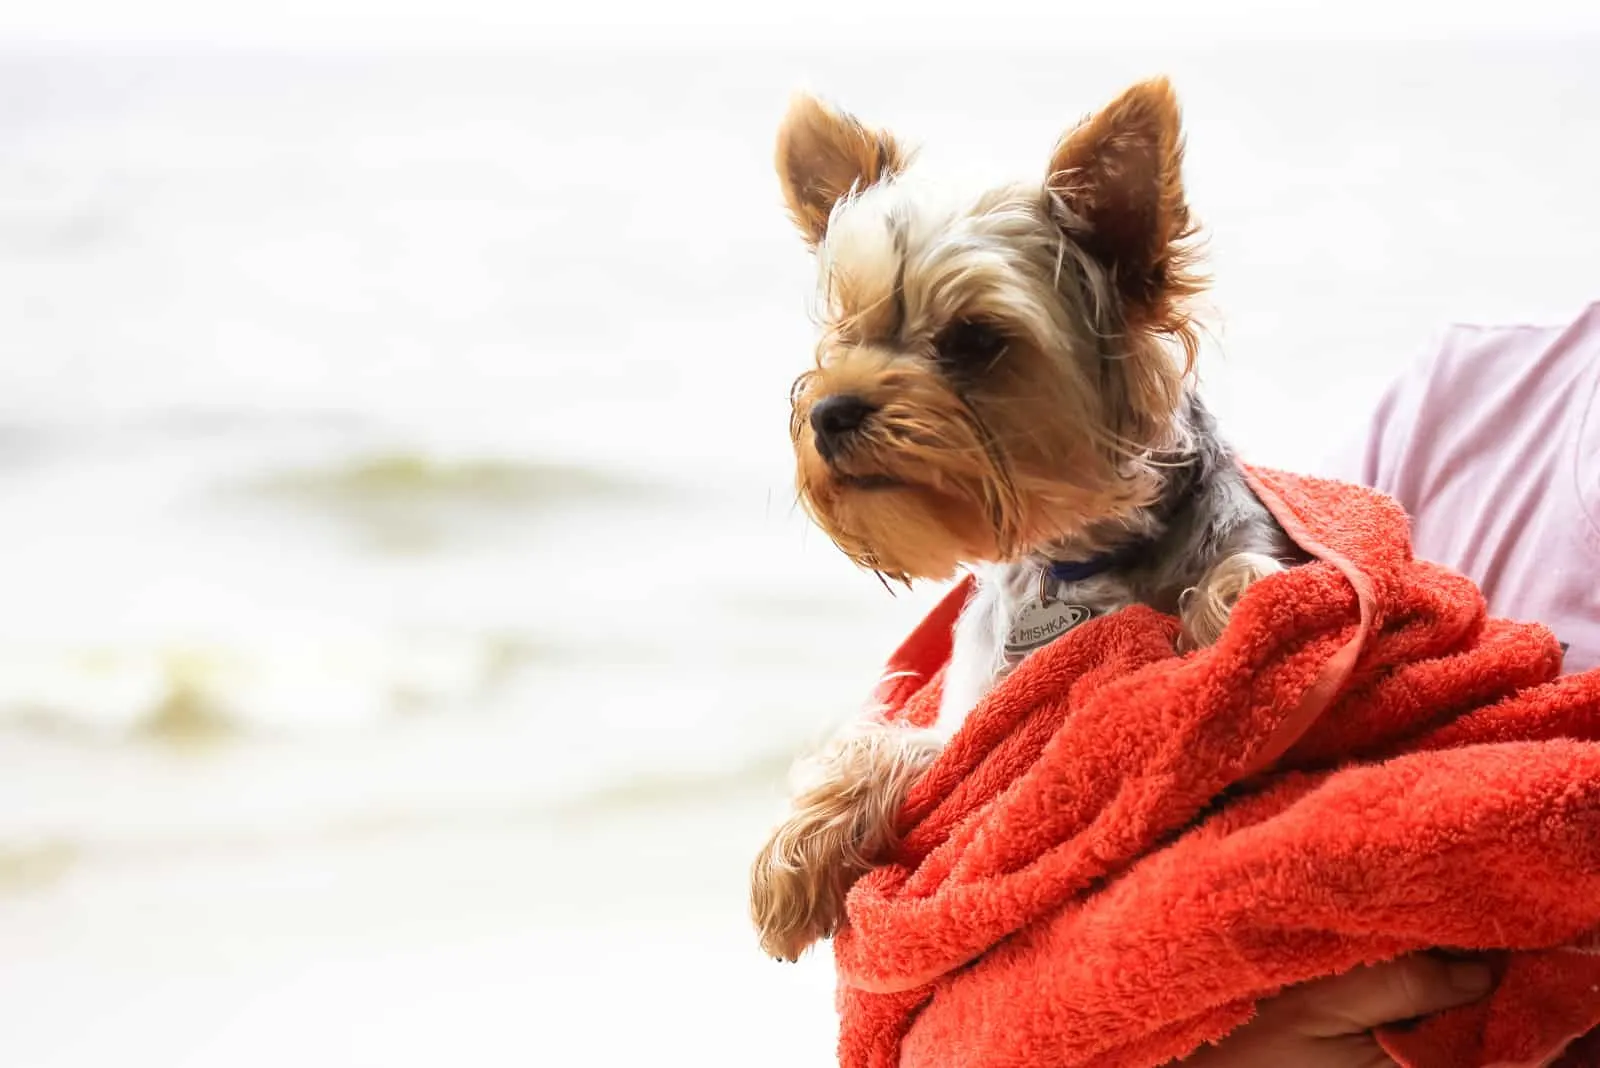 Cute little Yorkshire Terrier dog in a red terry towel